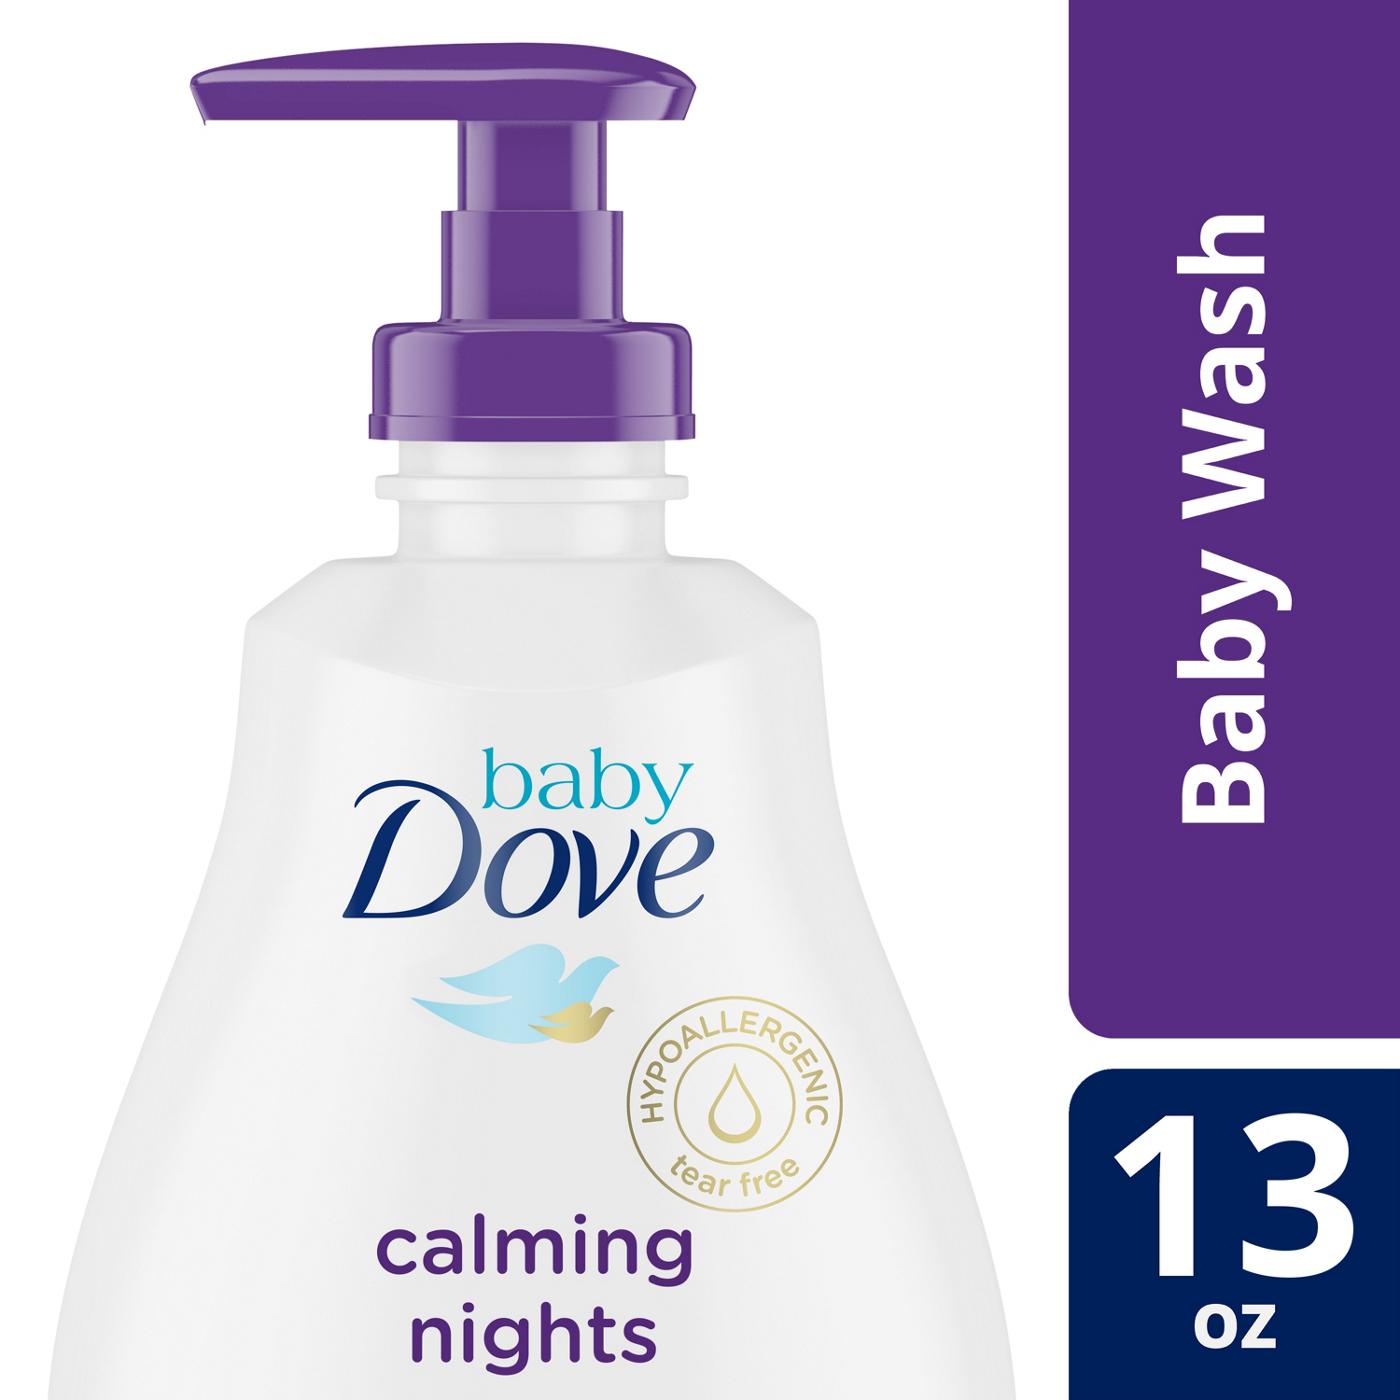 Baby Dove Sensitive Skin Care Night Time Wash; image 2 of 3